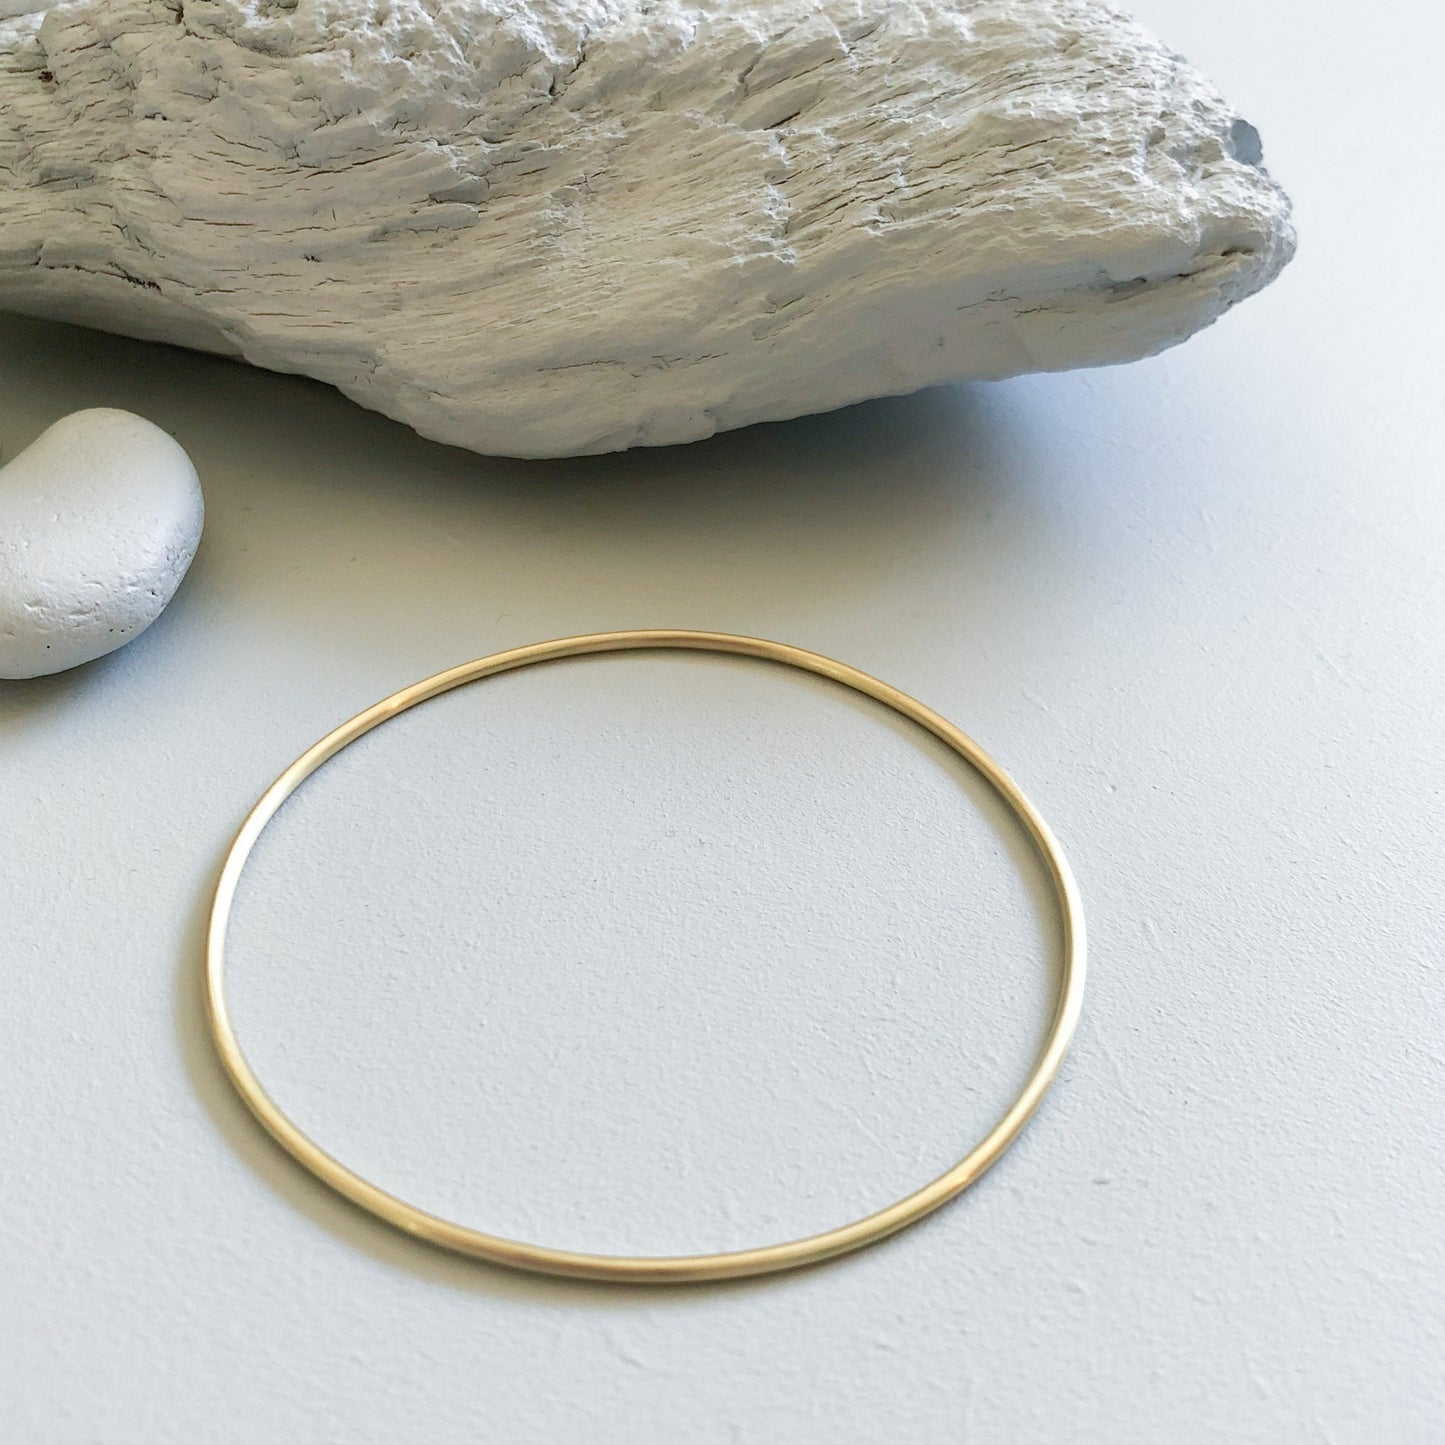 almost perfectly round golden bangle - 14k solid gold 1,5mm